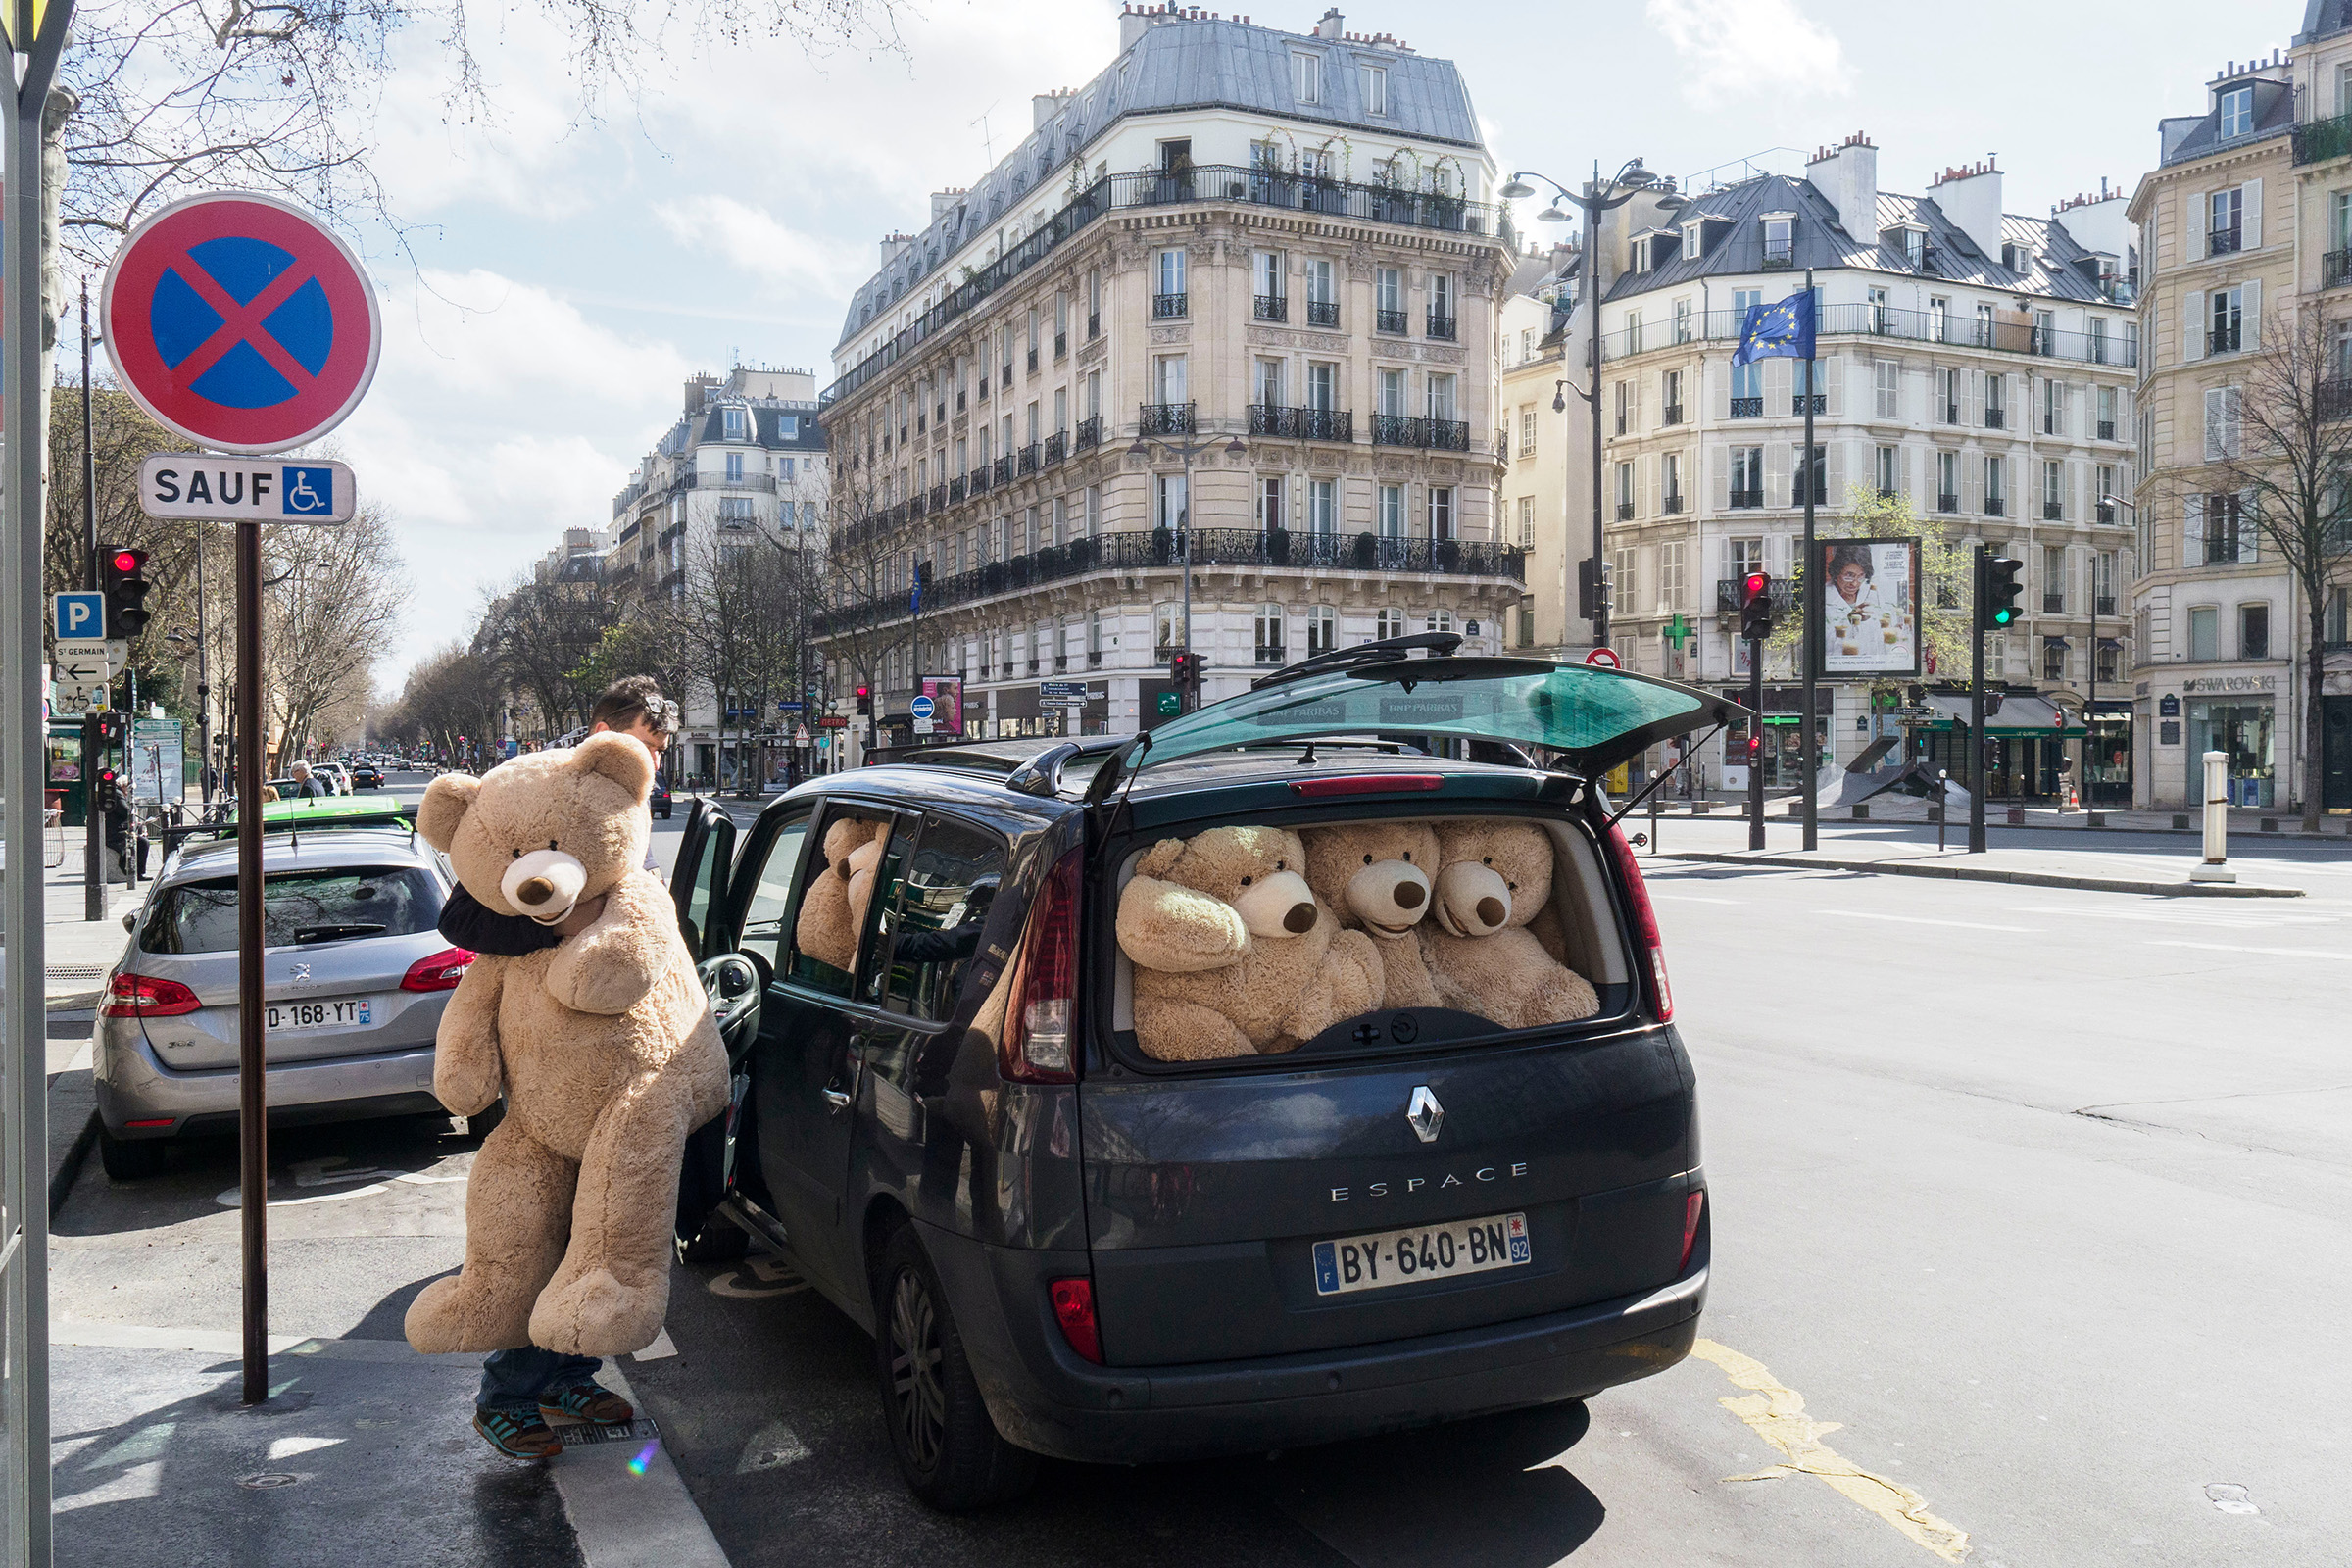 A man distributes giant teddy bears along emptied streets in Paris on March 15, the first day of the city’s lockdown; nine days later, residents were allowed outside only for exercise once a day, within 1 km of their homes (Thomas Dworzak—Magnum Photos)